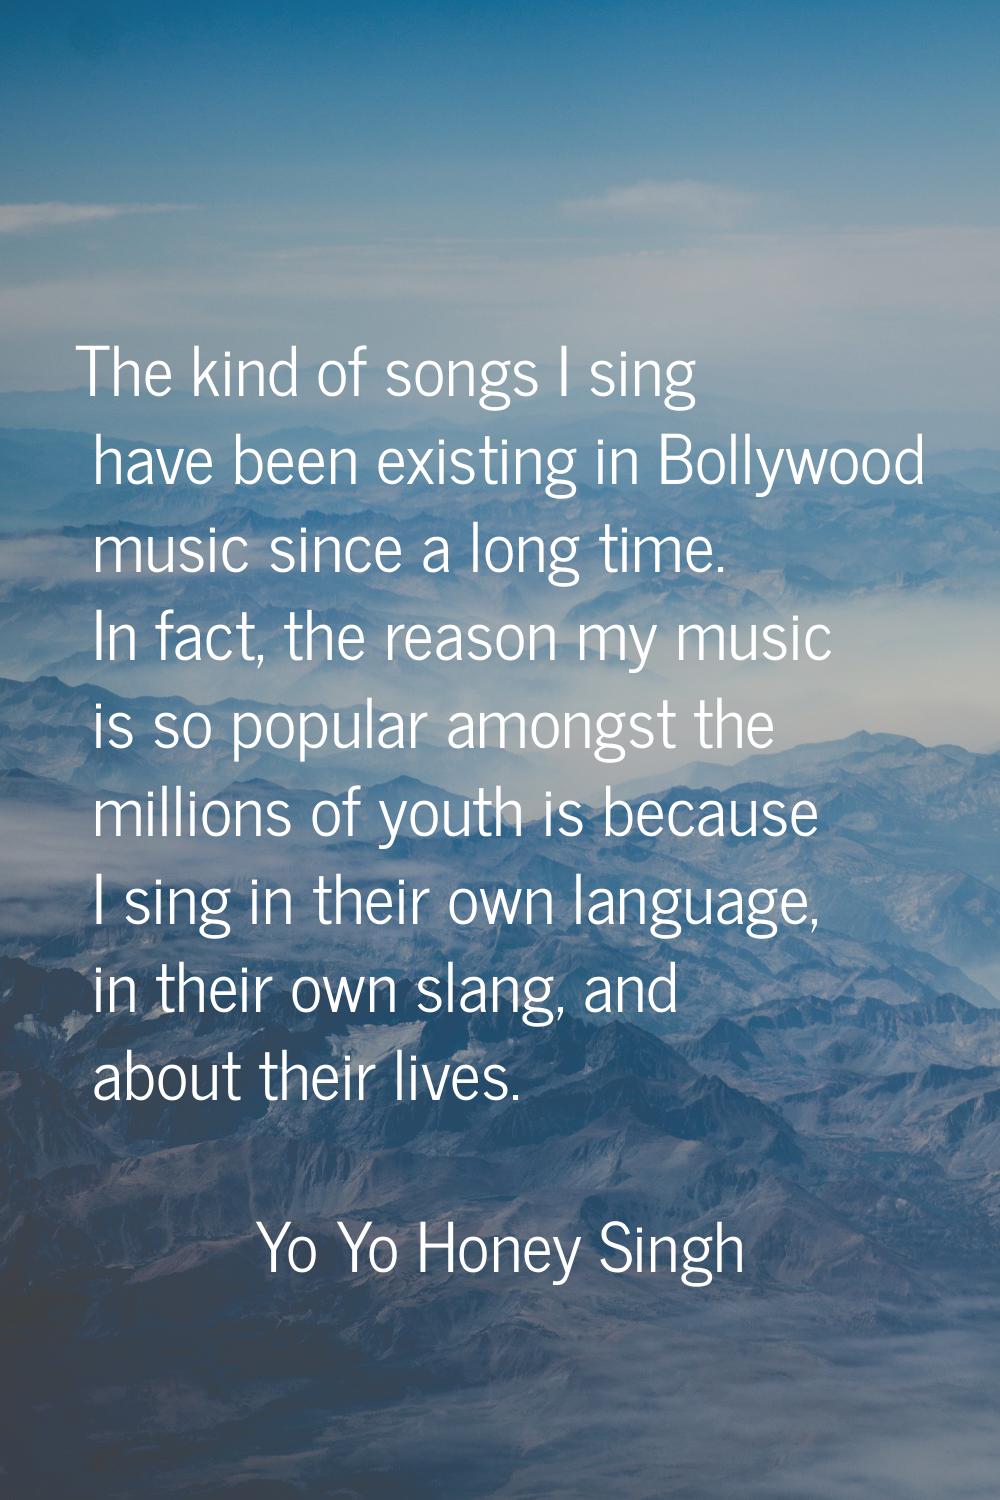 The kind of songs I sing have been existing in Bollywood music since a long time. In fact, the reas